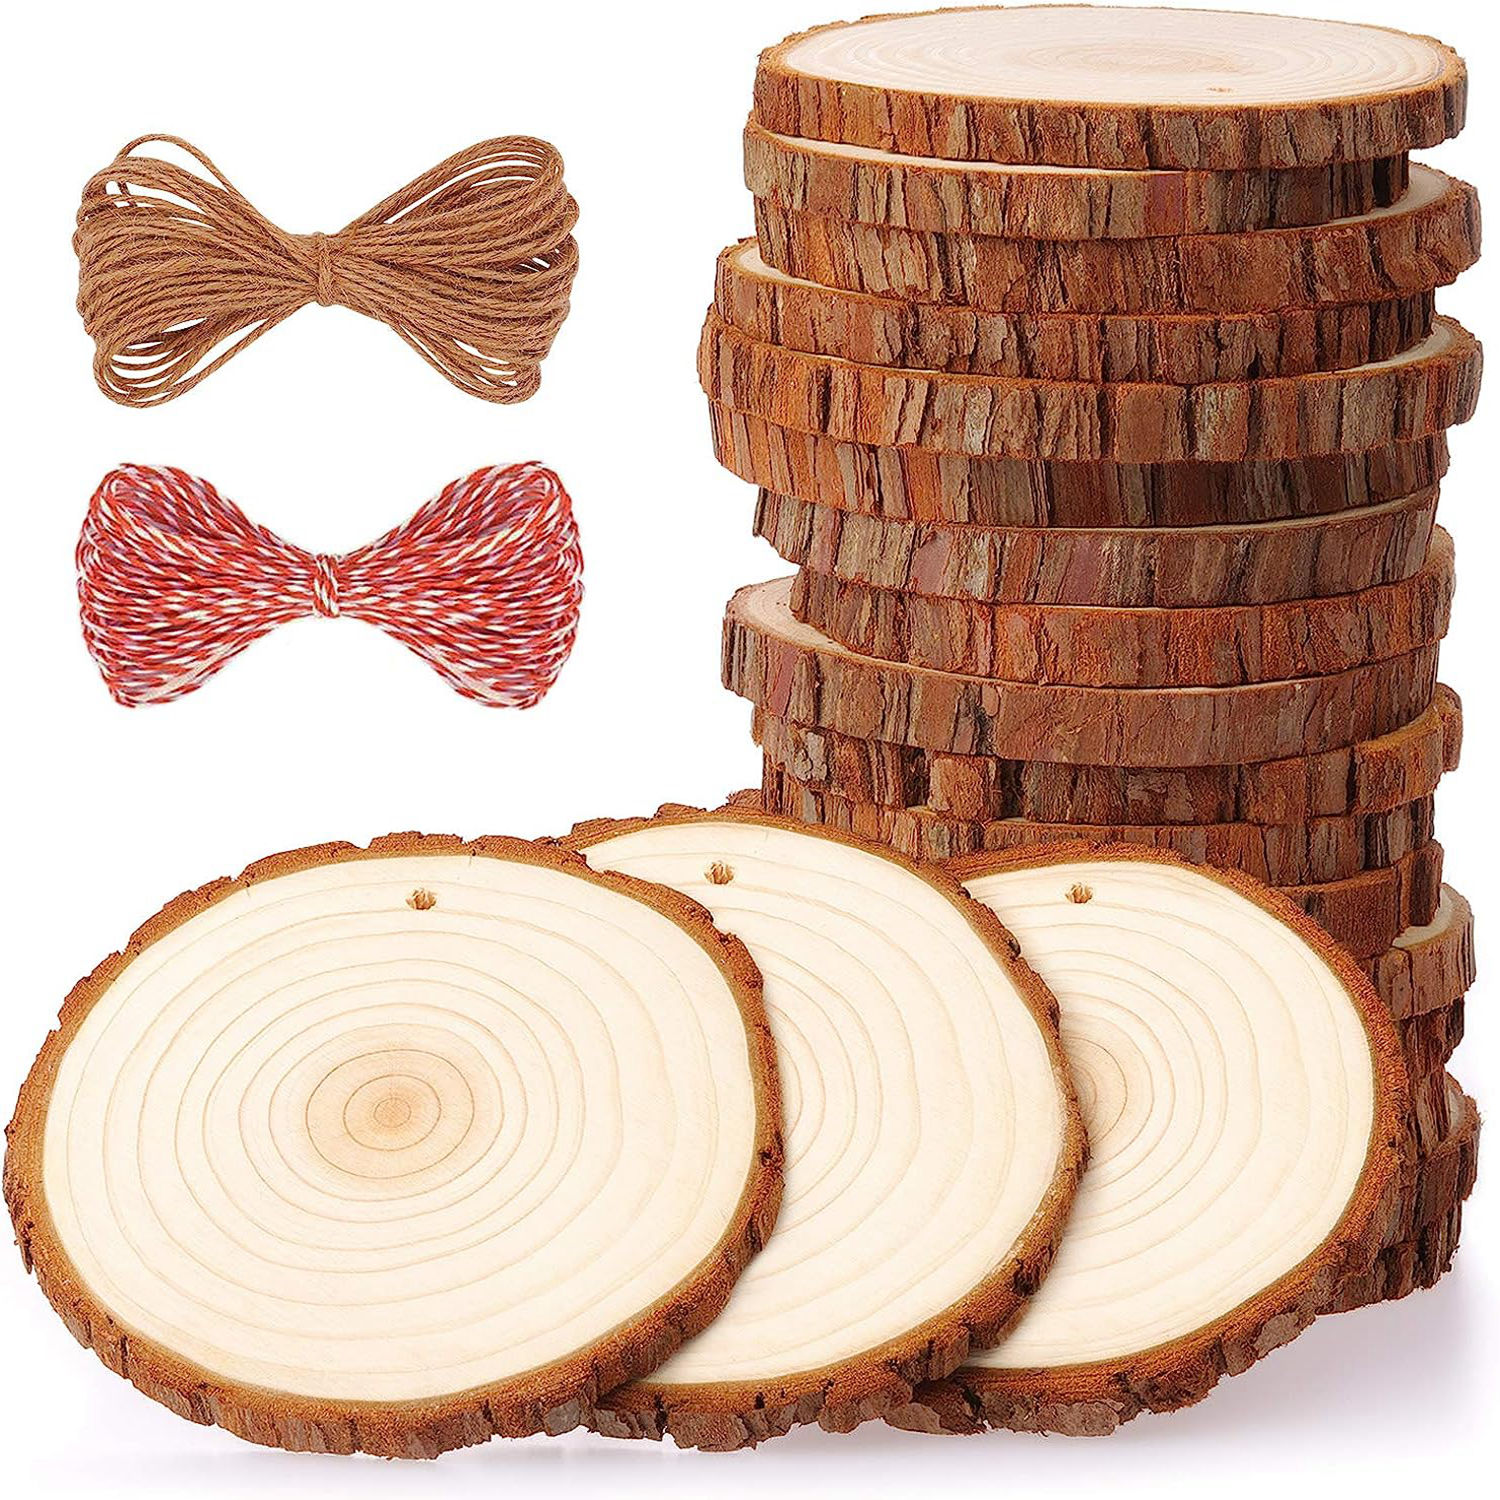 20 Pcs 12 inch Unfinished Wood Circles, Thickness 2.6 mm, Wooden Rounds for Crafts, Wood Discs for DIY Painting Decorations, Weddings and Parties,by